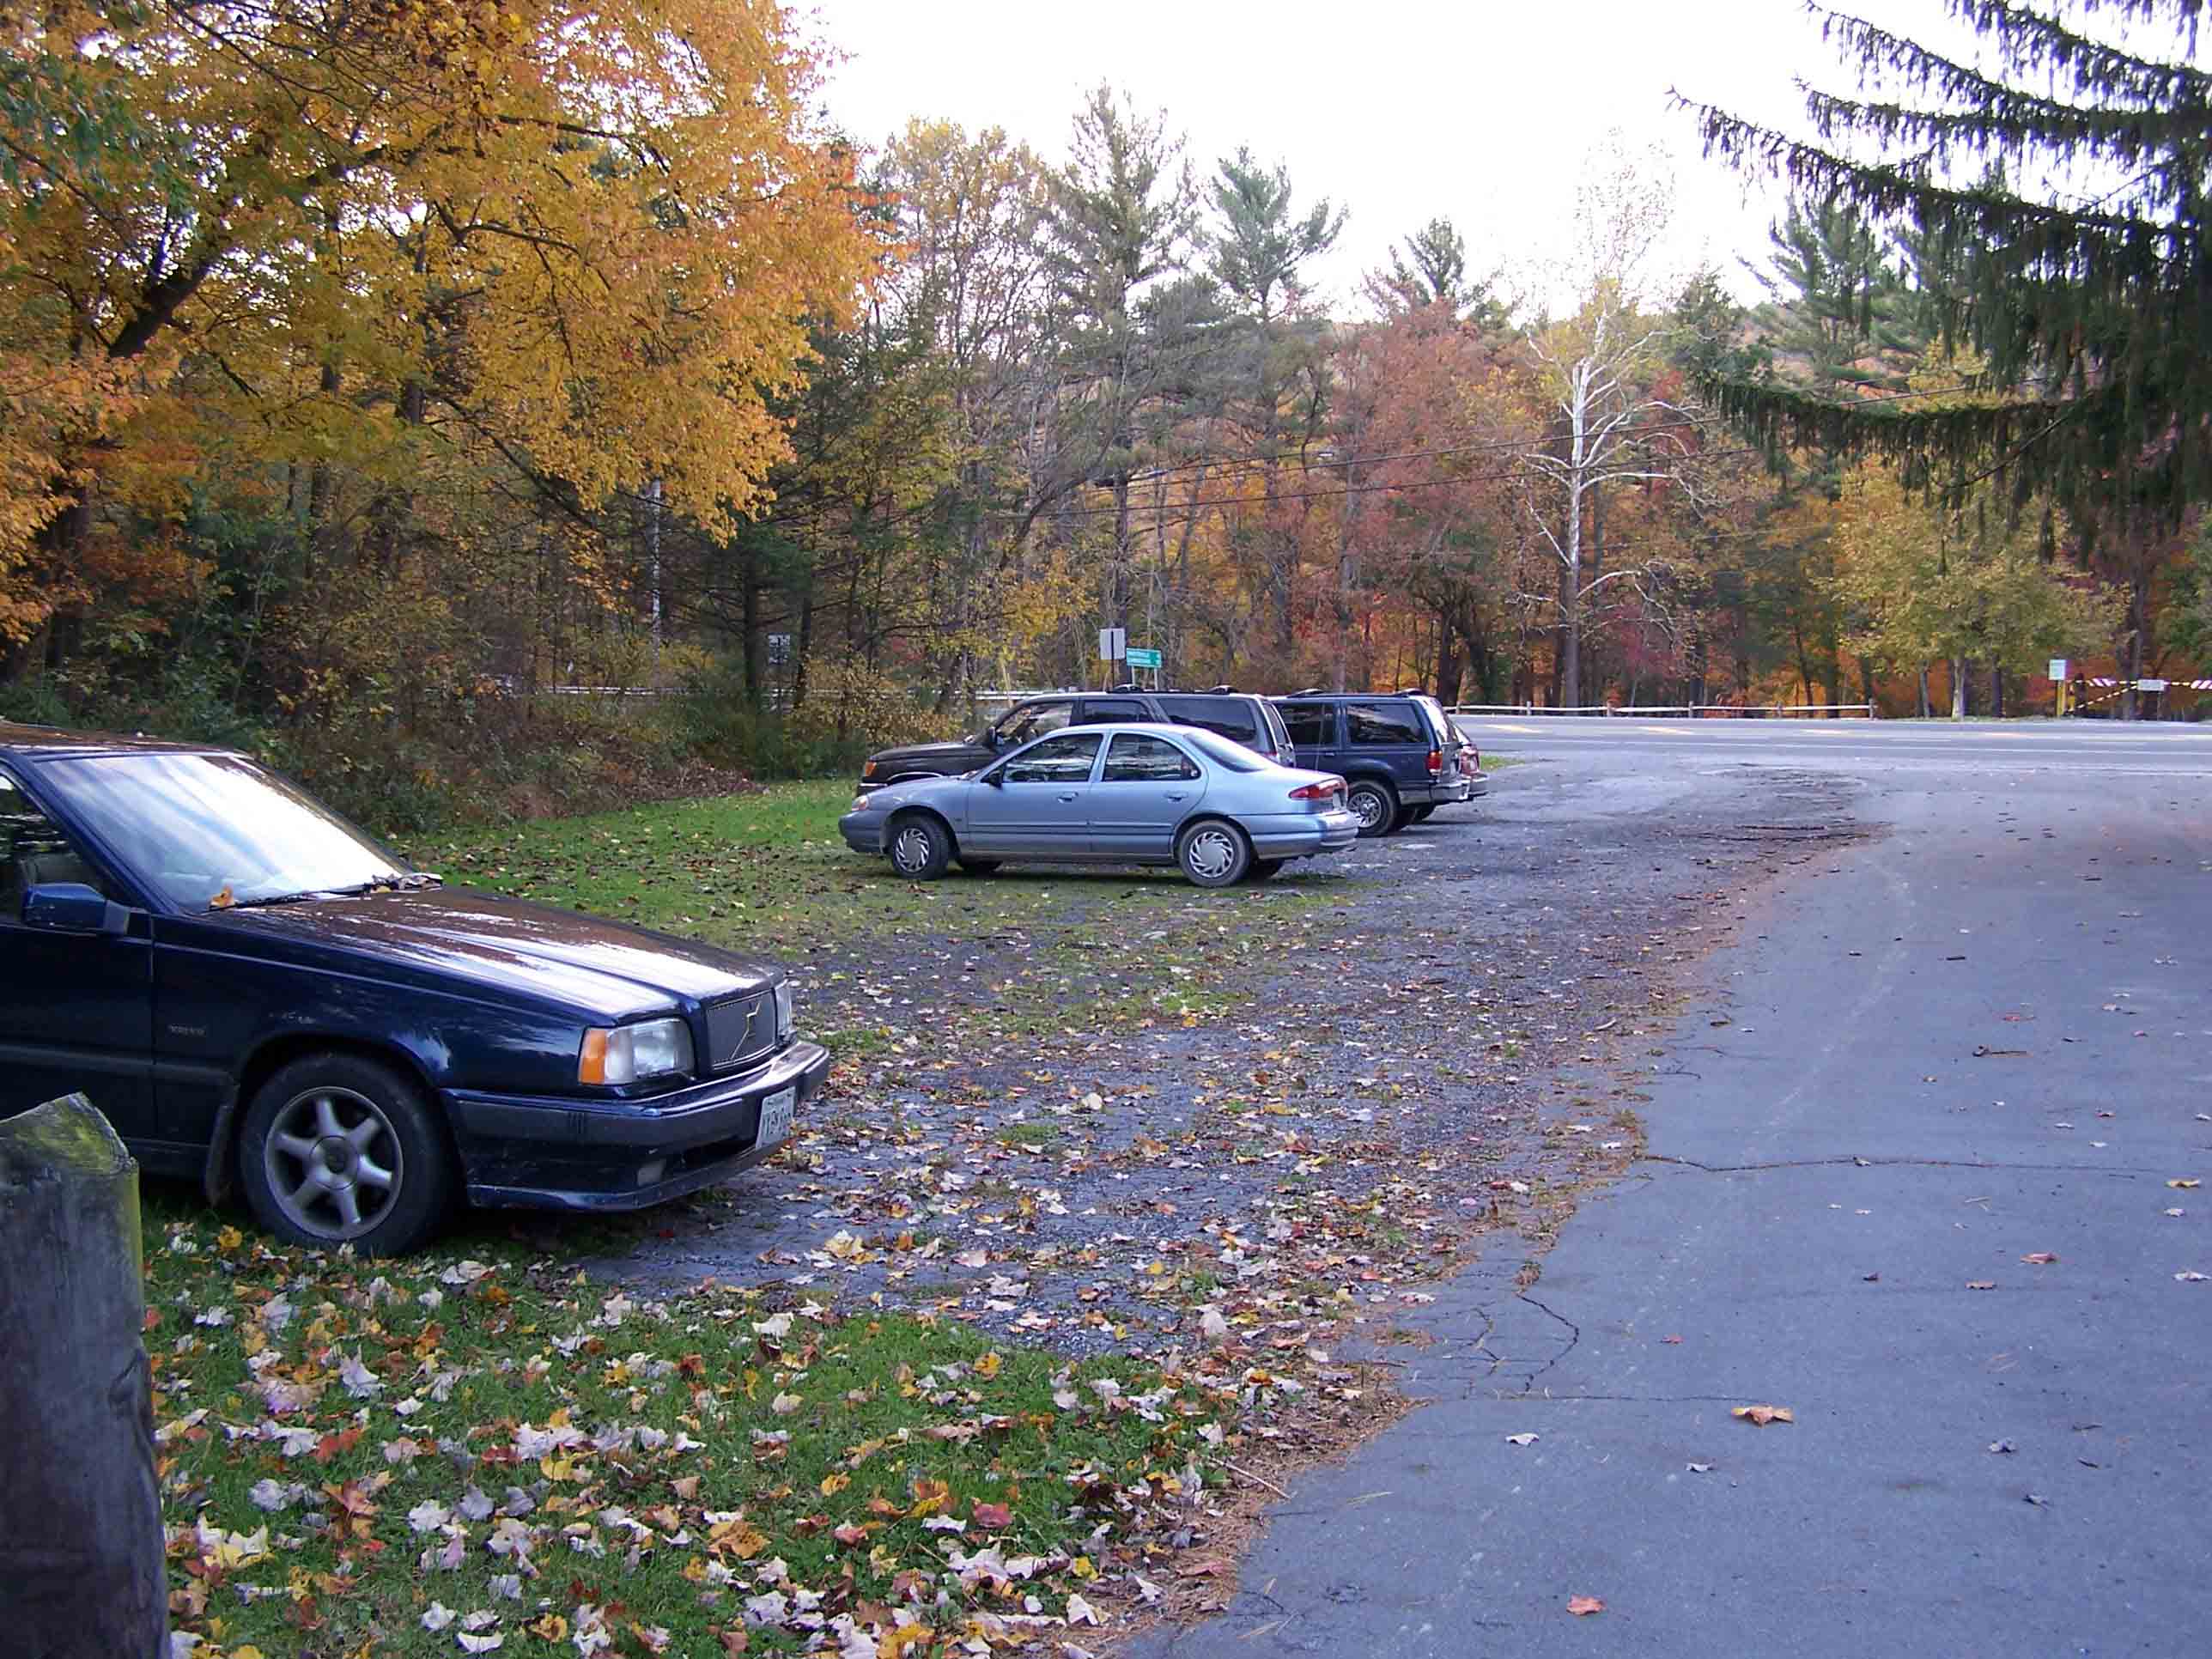 mm 0.0 - Parking at Caledonia State Park at the intersection of US 30 and PA 233. The AT crossing of US 30 is 0.5 miles west. Courtesy at@rohland.org